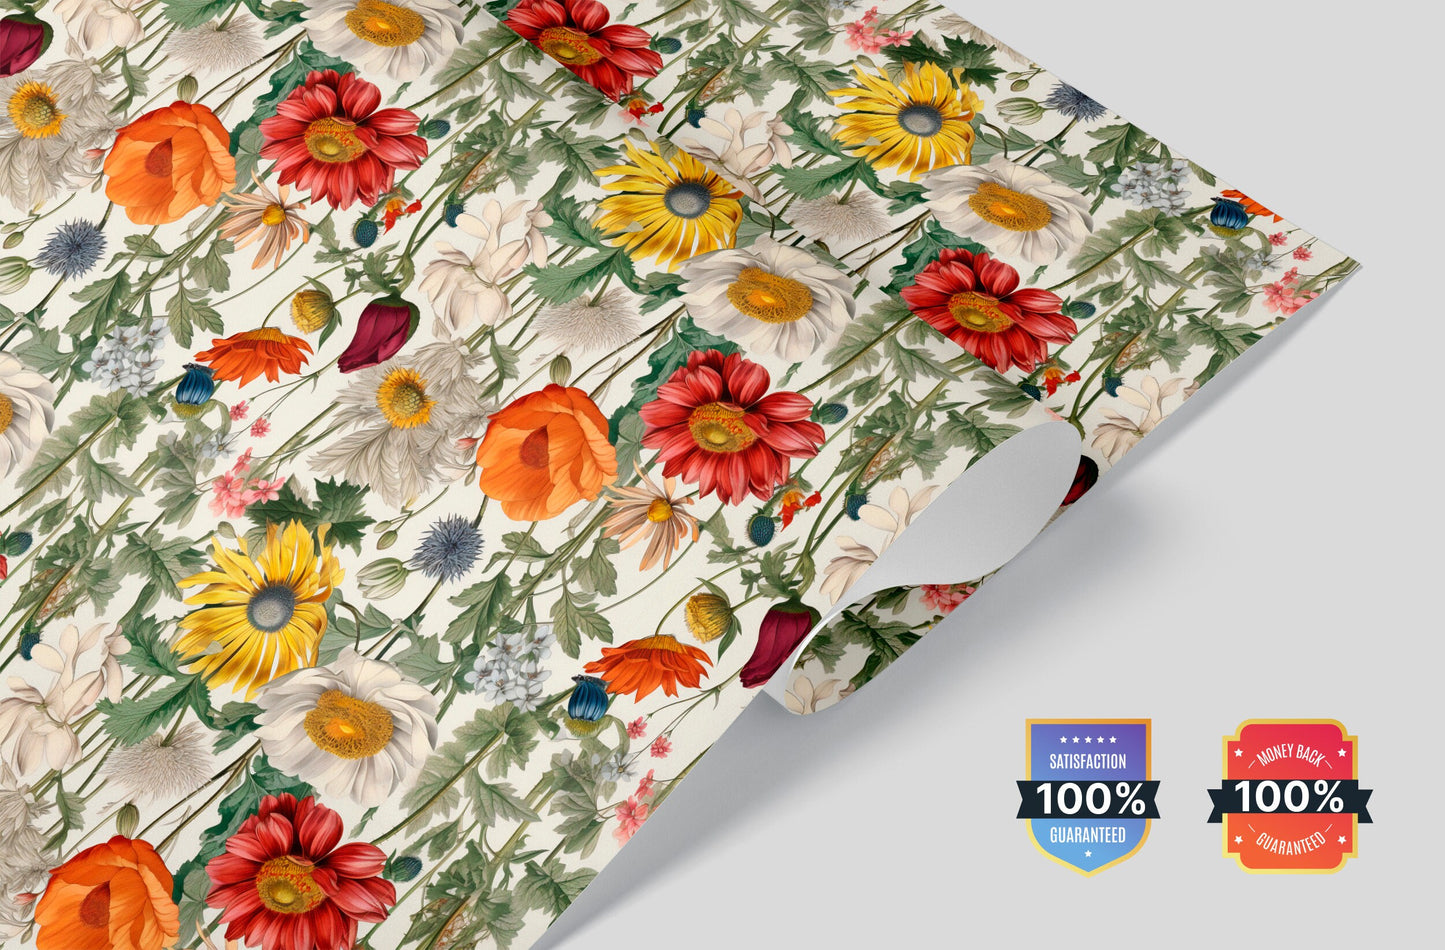 Summer Floral Wallpaper | Field Flowers by Miami Walls and Decor | Peel & Stick Wallpapers, Removable and Renter Friendly